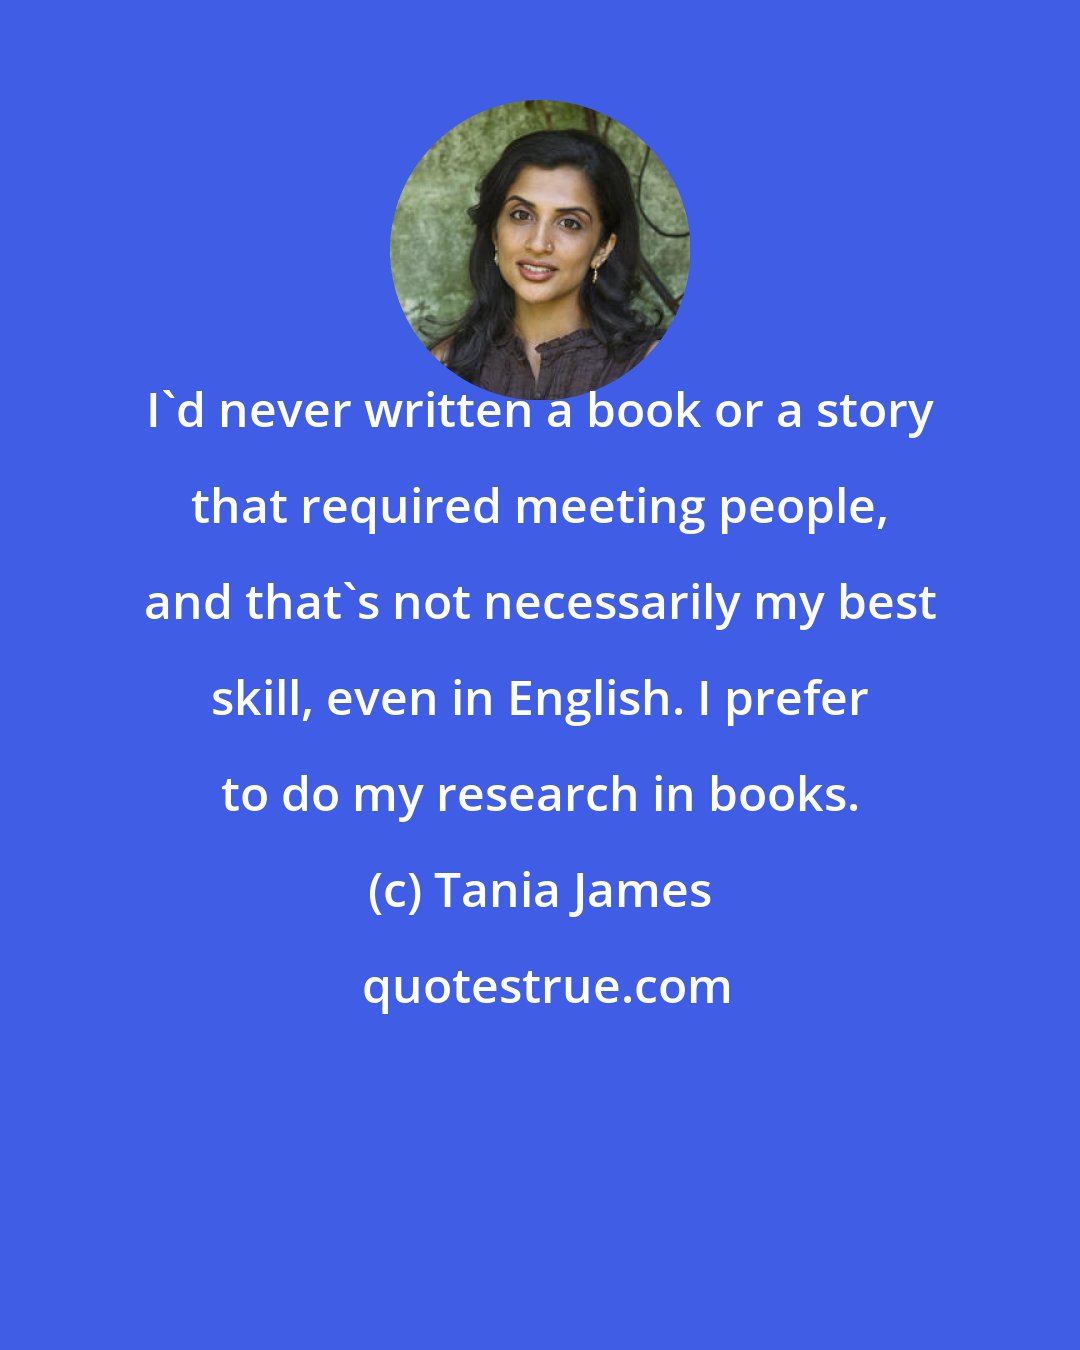 Tania James: I'd never written a book or a story that required meeting people, and that's not necessarily my best skill, even in English. I prefer to do my research in books.